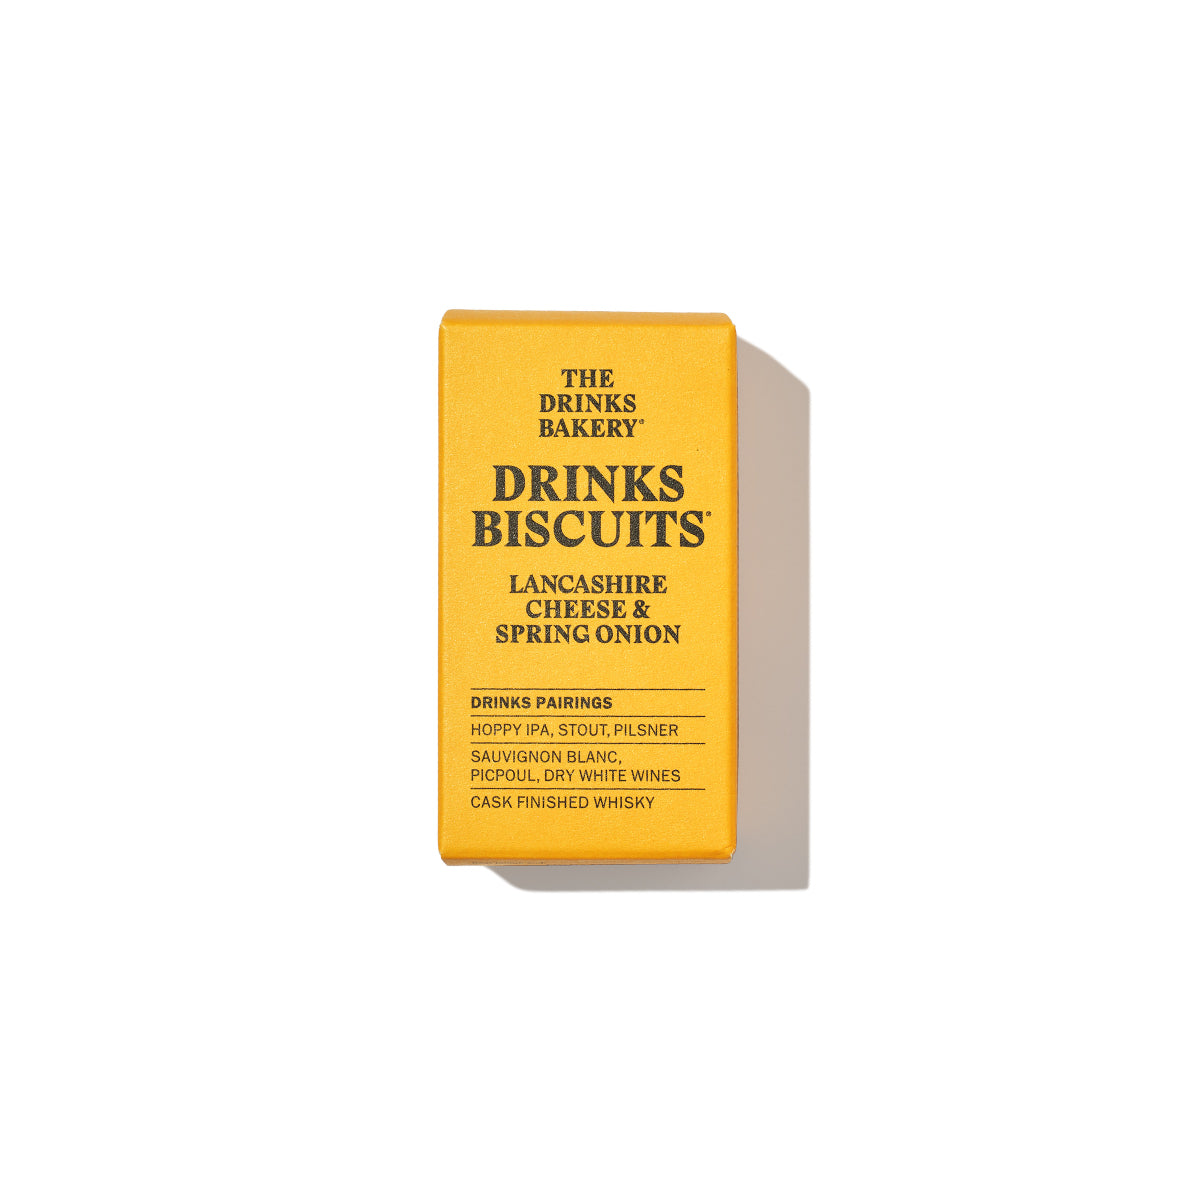 Drinks Biscuits